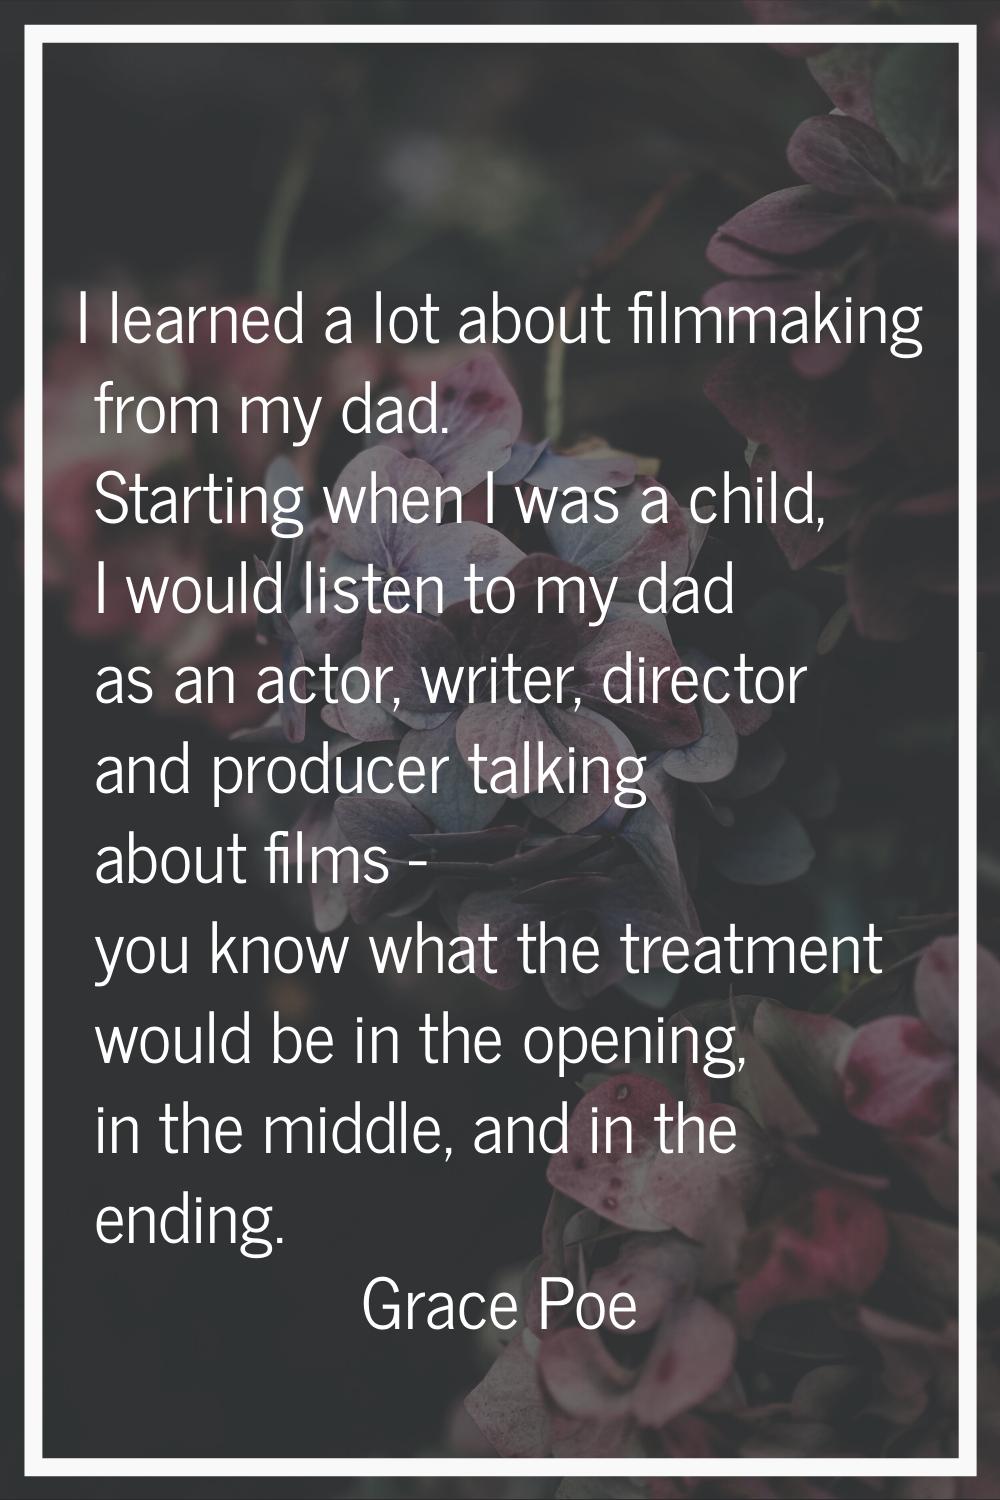 I learned a lot about filmmaking from my dad. Starting when I was a child, I would listen to my dad